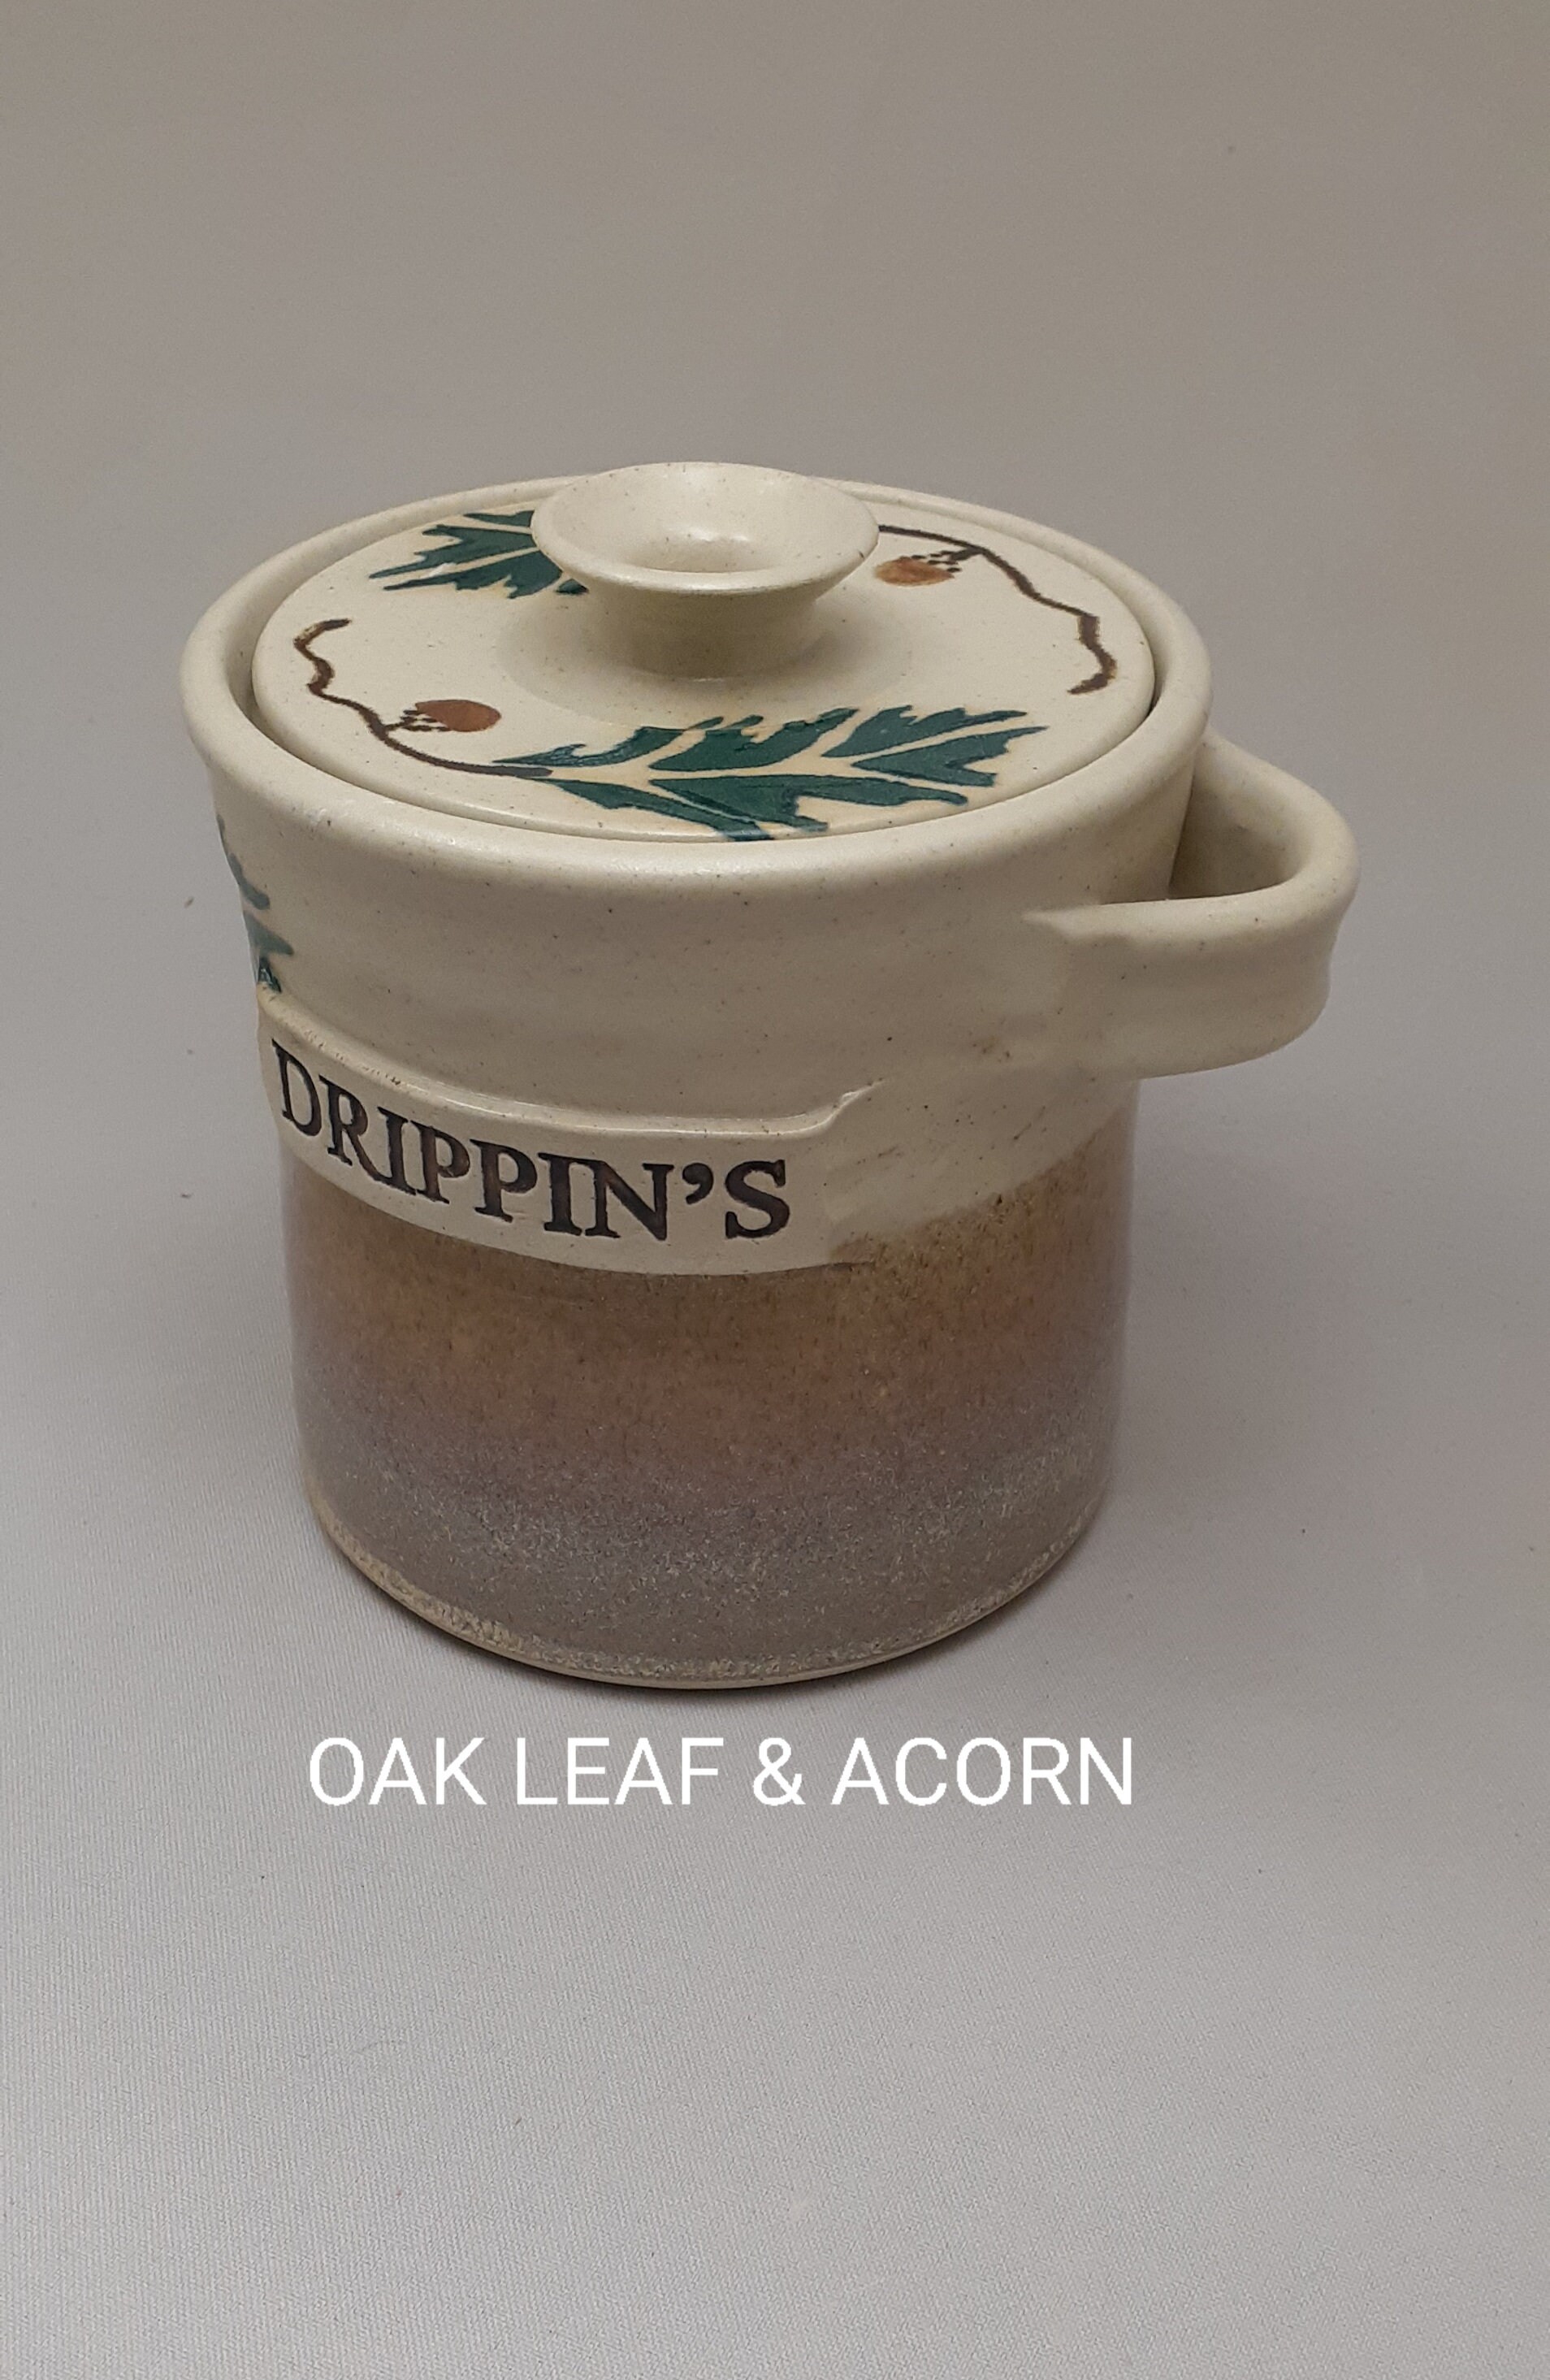 Grease Jar, Drippings Jar, Pottery, Ceramic, Drippings Container, Grease  Pot Bacon Grease Holder Bacon Drippings Keeper Container for Grease 